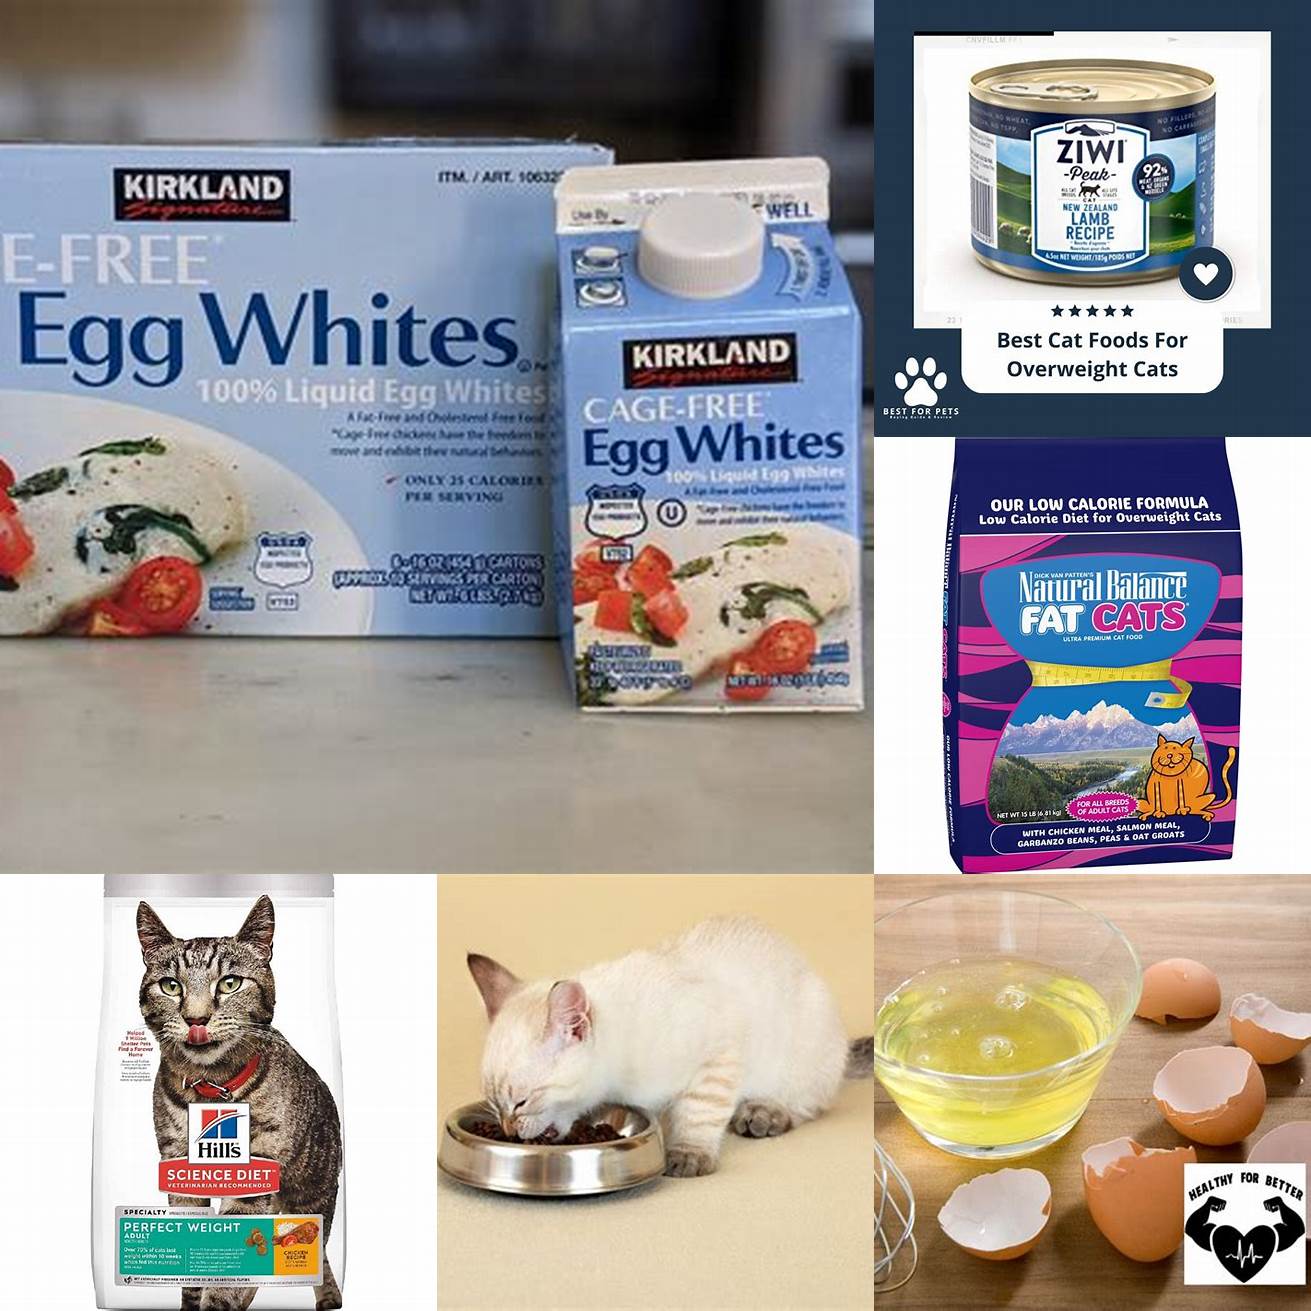 Egg whites are low in fat making them a healthy treat for overweight cats